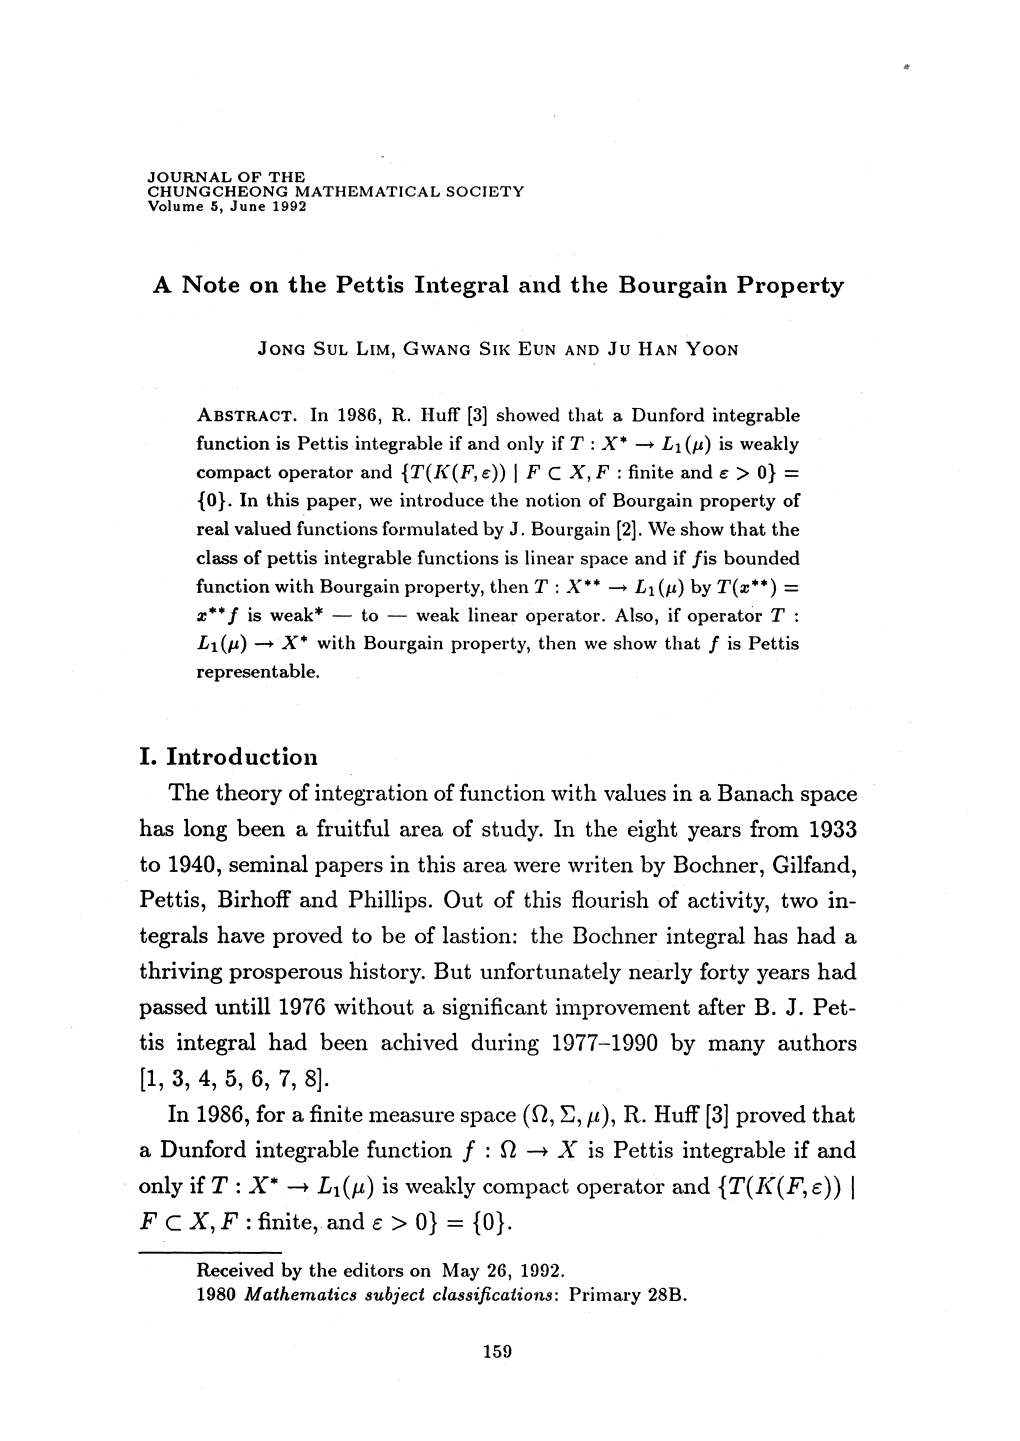 A Note on the Pettis Integral and the Bourgain Property I. Introduction